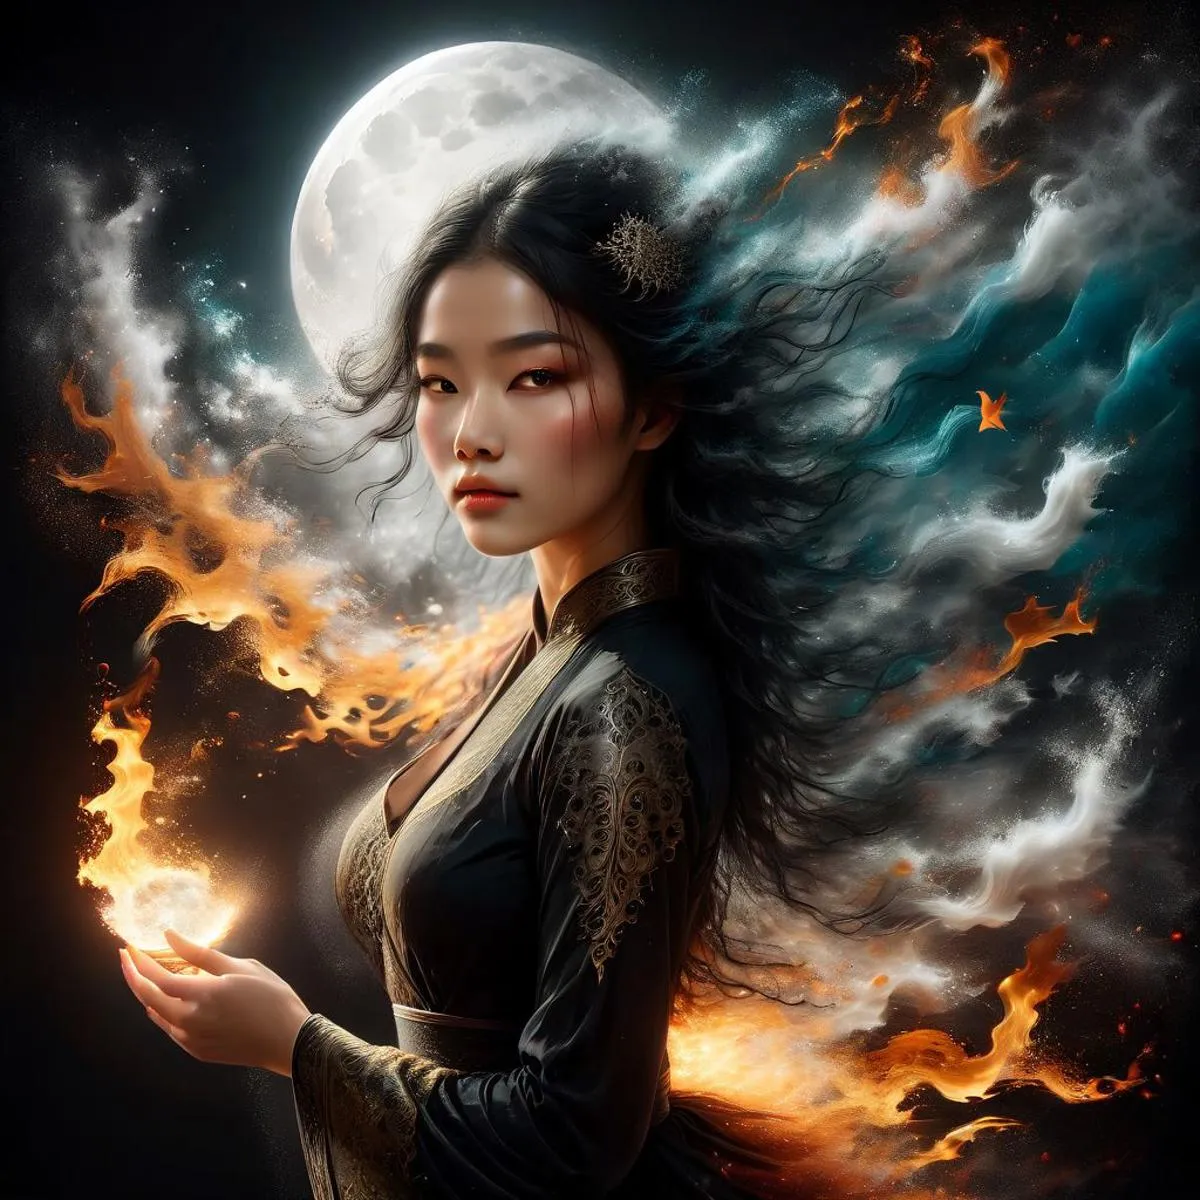 A fantasy art image of a woman with long flowing hair, holding fire in one hand with the full moon in the background. This is an AI generated image using Stable Diffusion.